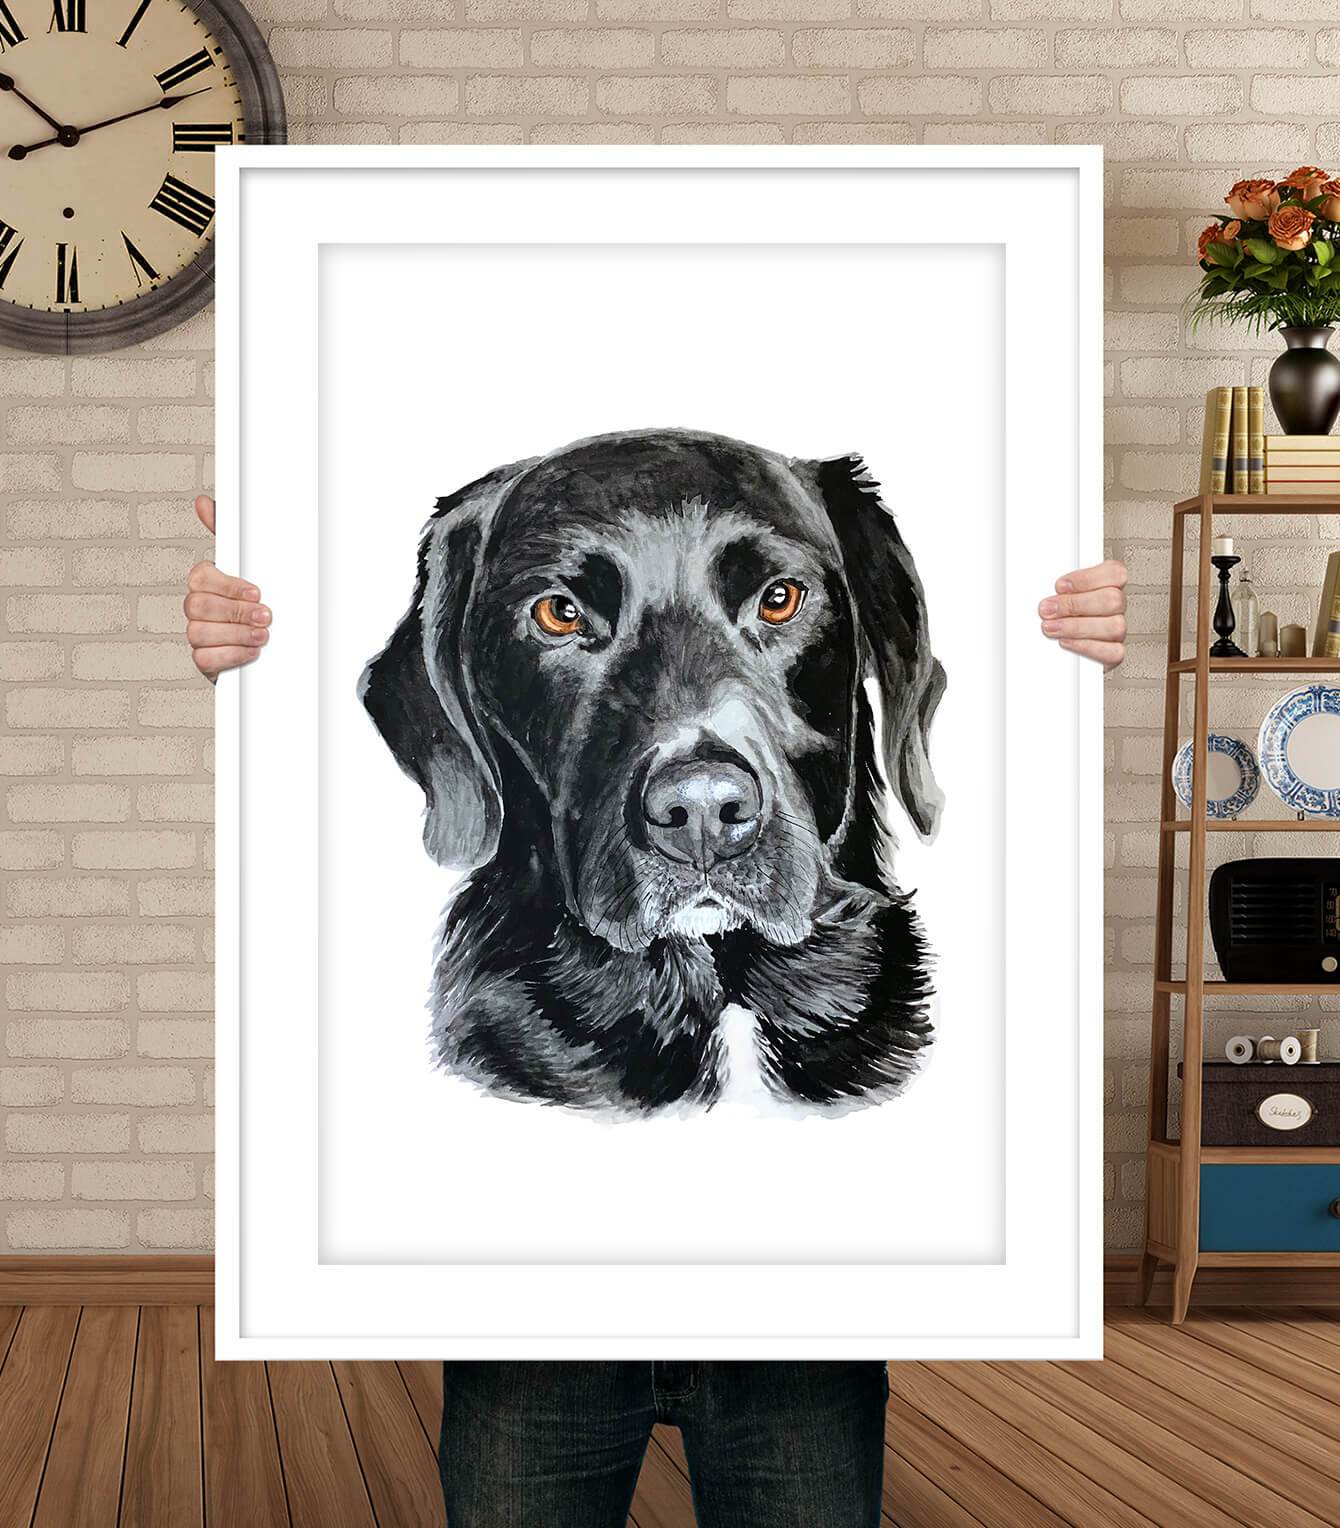 What are some of the most popular websites for bespoke pet portraits? post thumbnail image